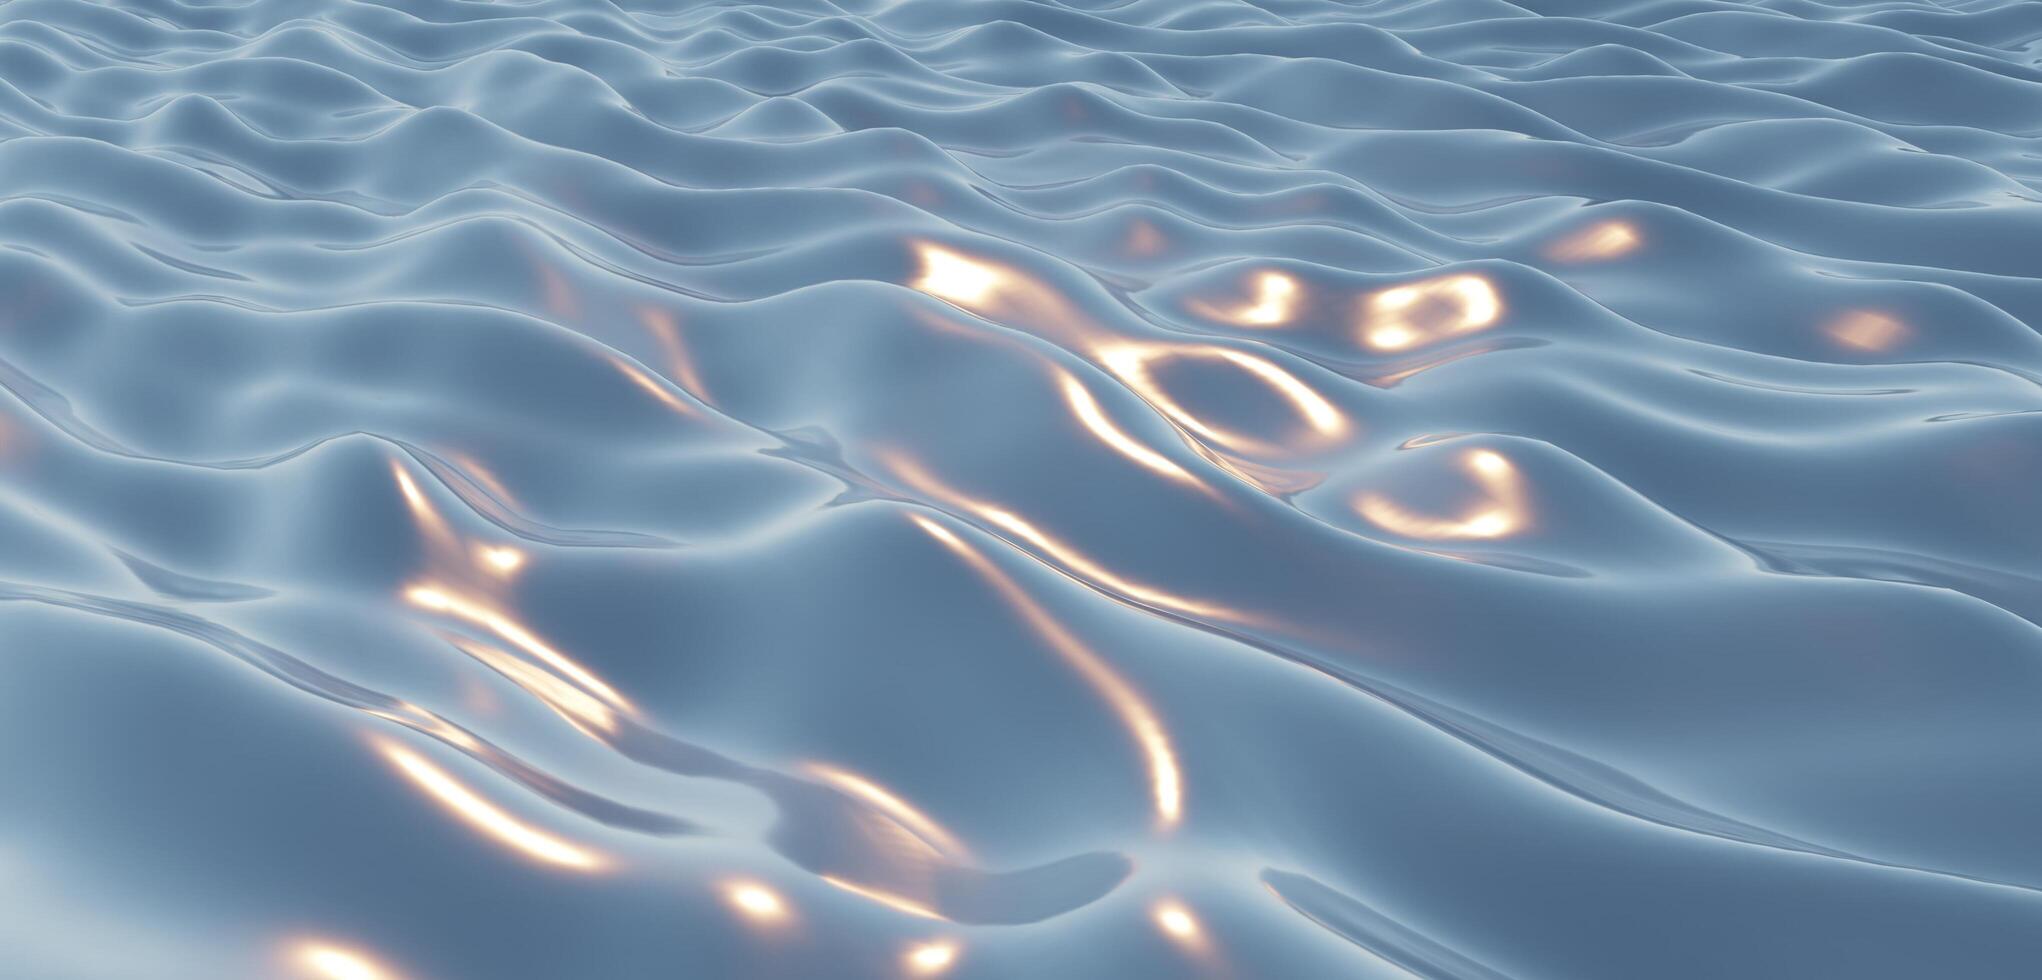 reflective water surface water wave background 3D illustration photo